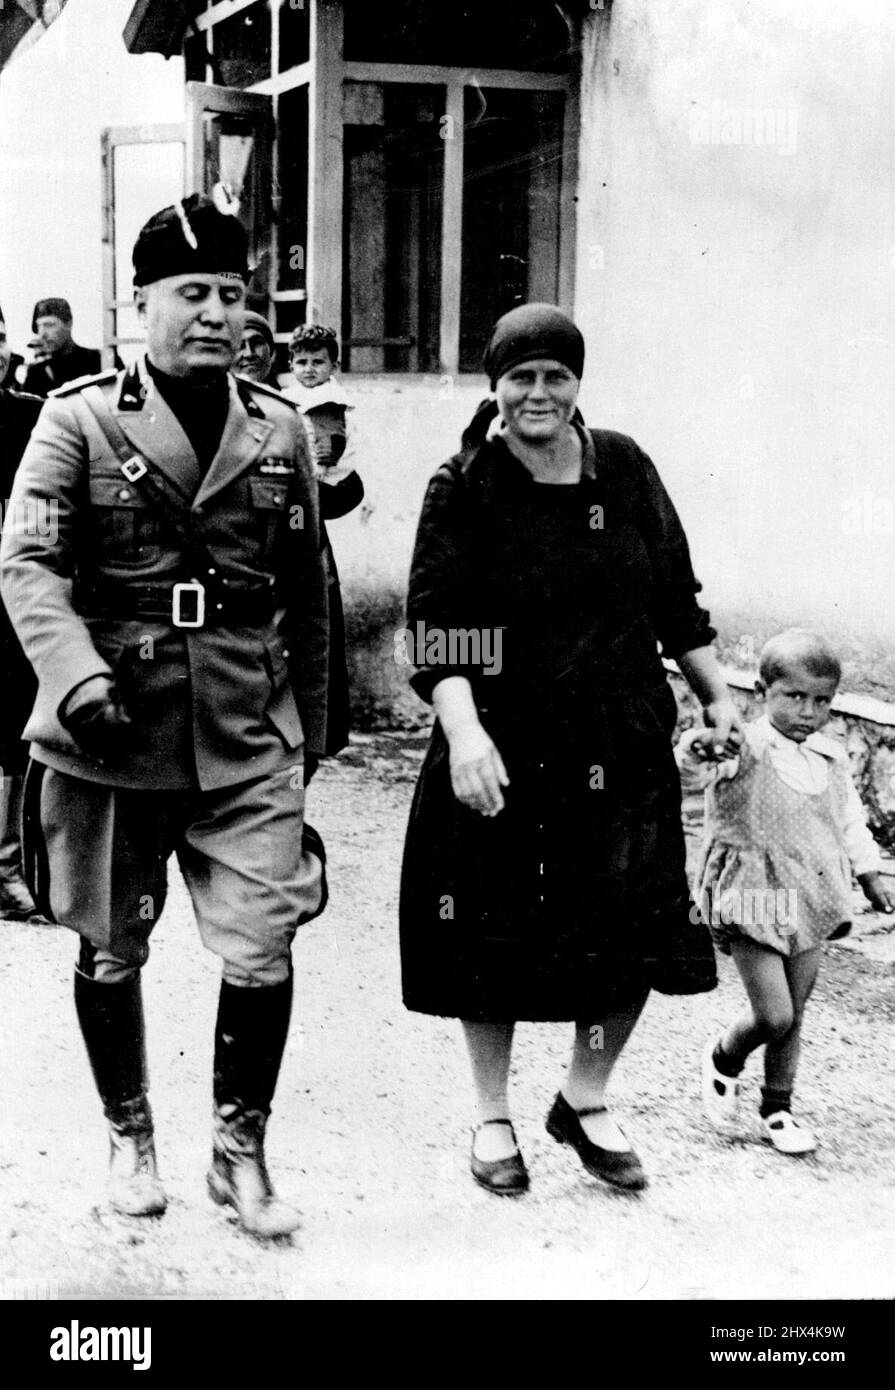 Benito Mussolini - With Wife & Family - Personalities. May 25, 1936. Stock Photo